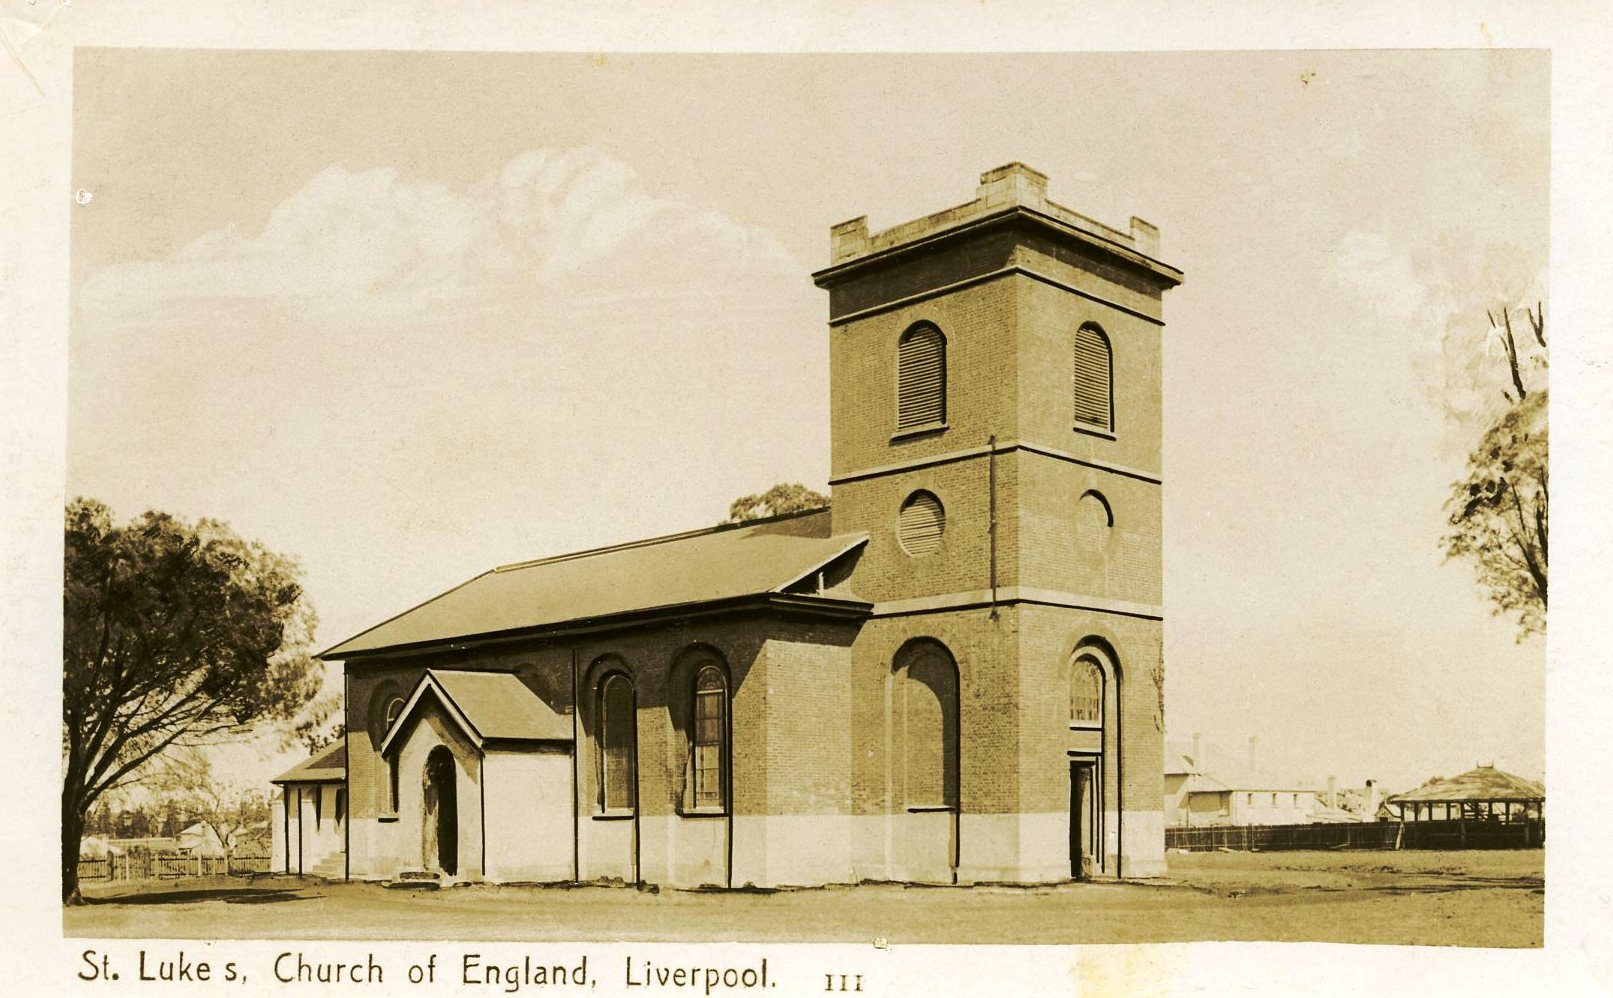 Postcard of St Luke's Church of England, Liverpool by Crown Studios Sydney, date unknown